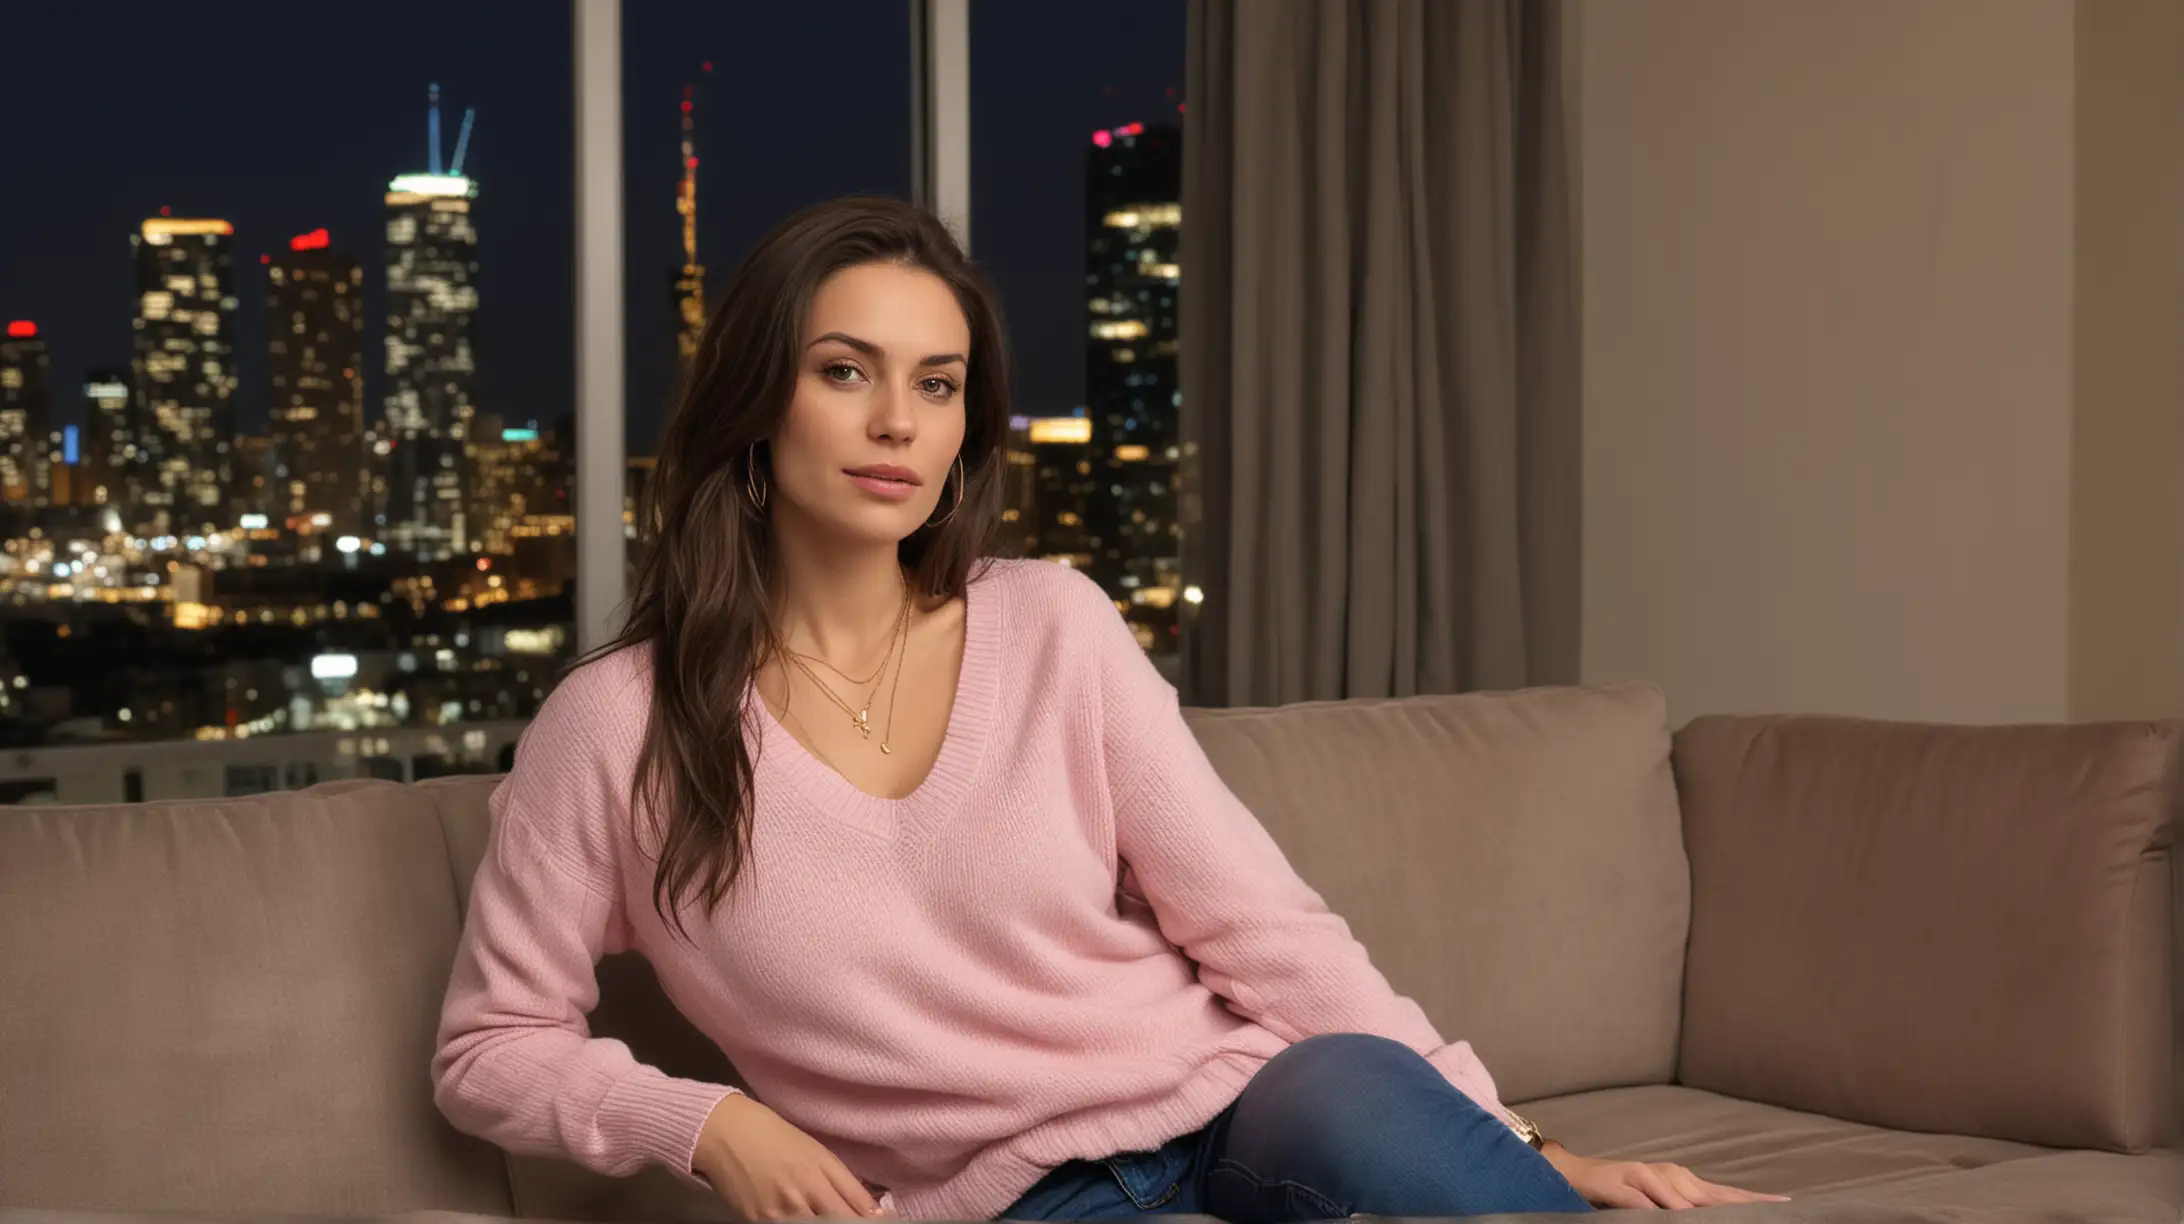 30 year old white woman with long dark brown hair and gold necklace, unbuttoned pink sweater, blue jeans, sitting on a couch, modern apartment at night, urban high rise background